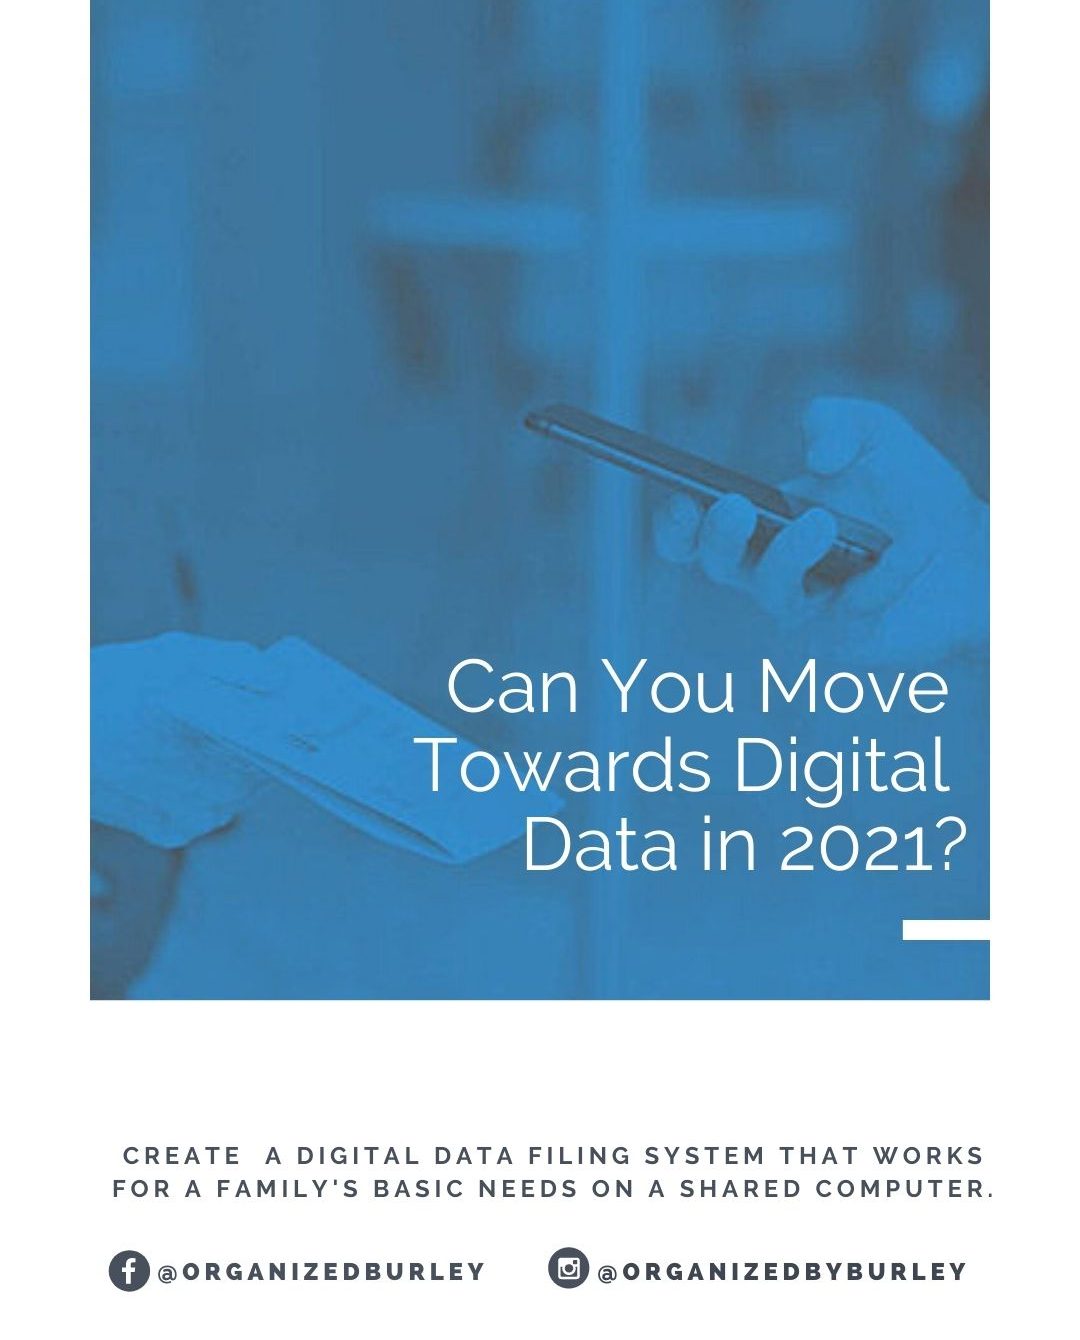 How to create digital data filing system for your family